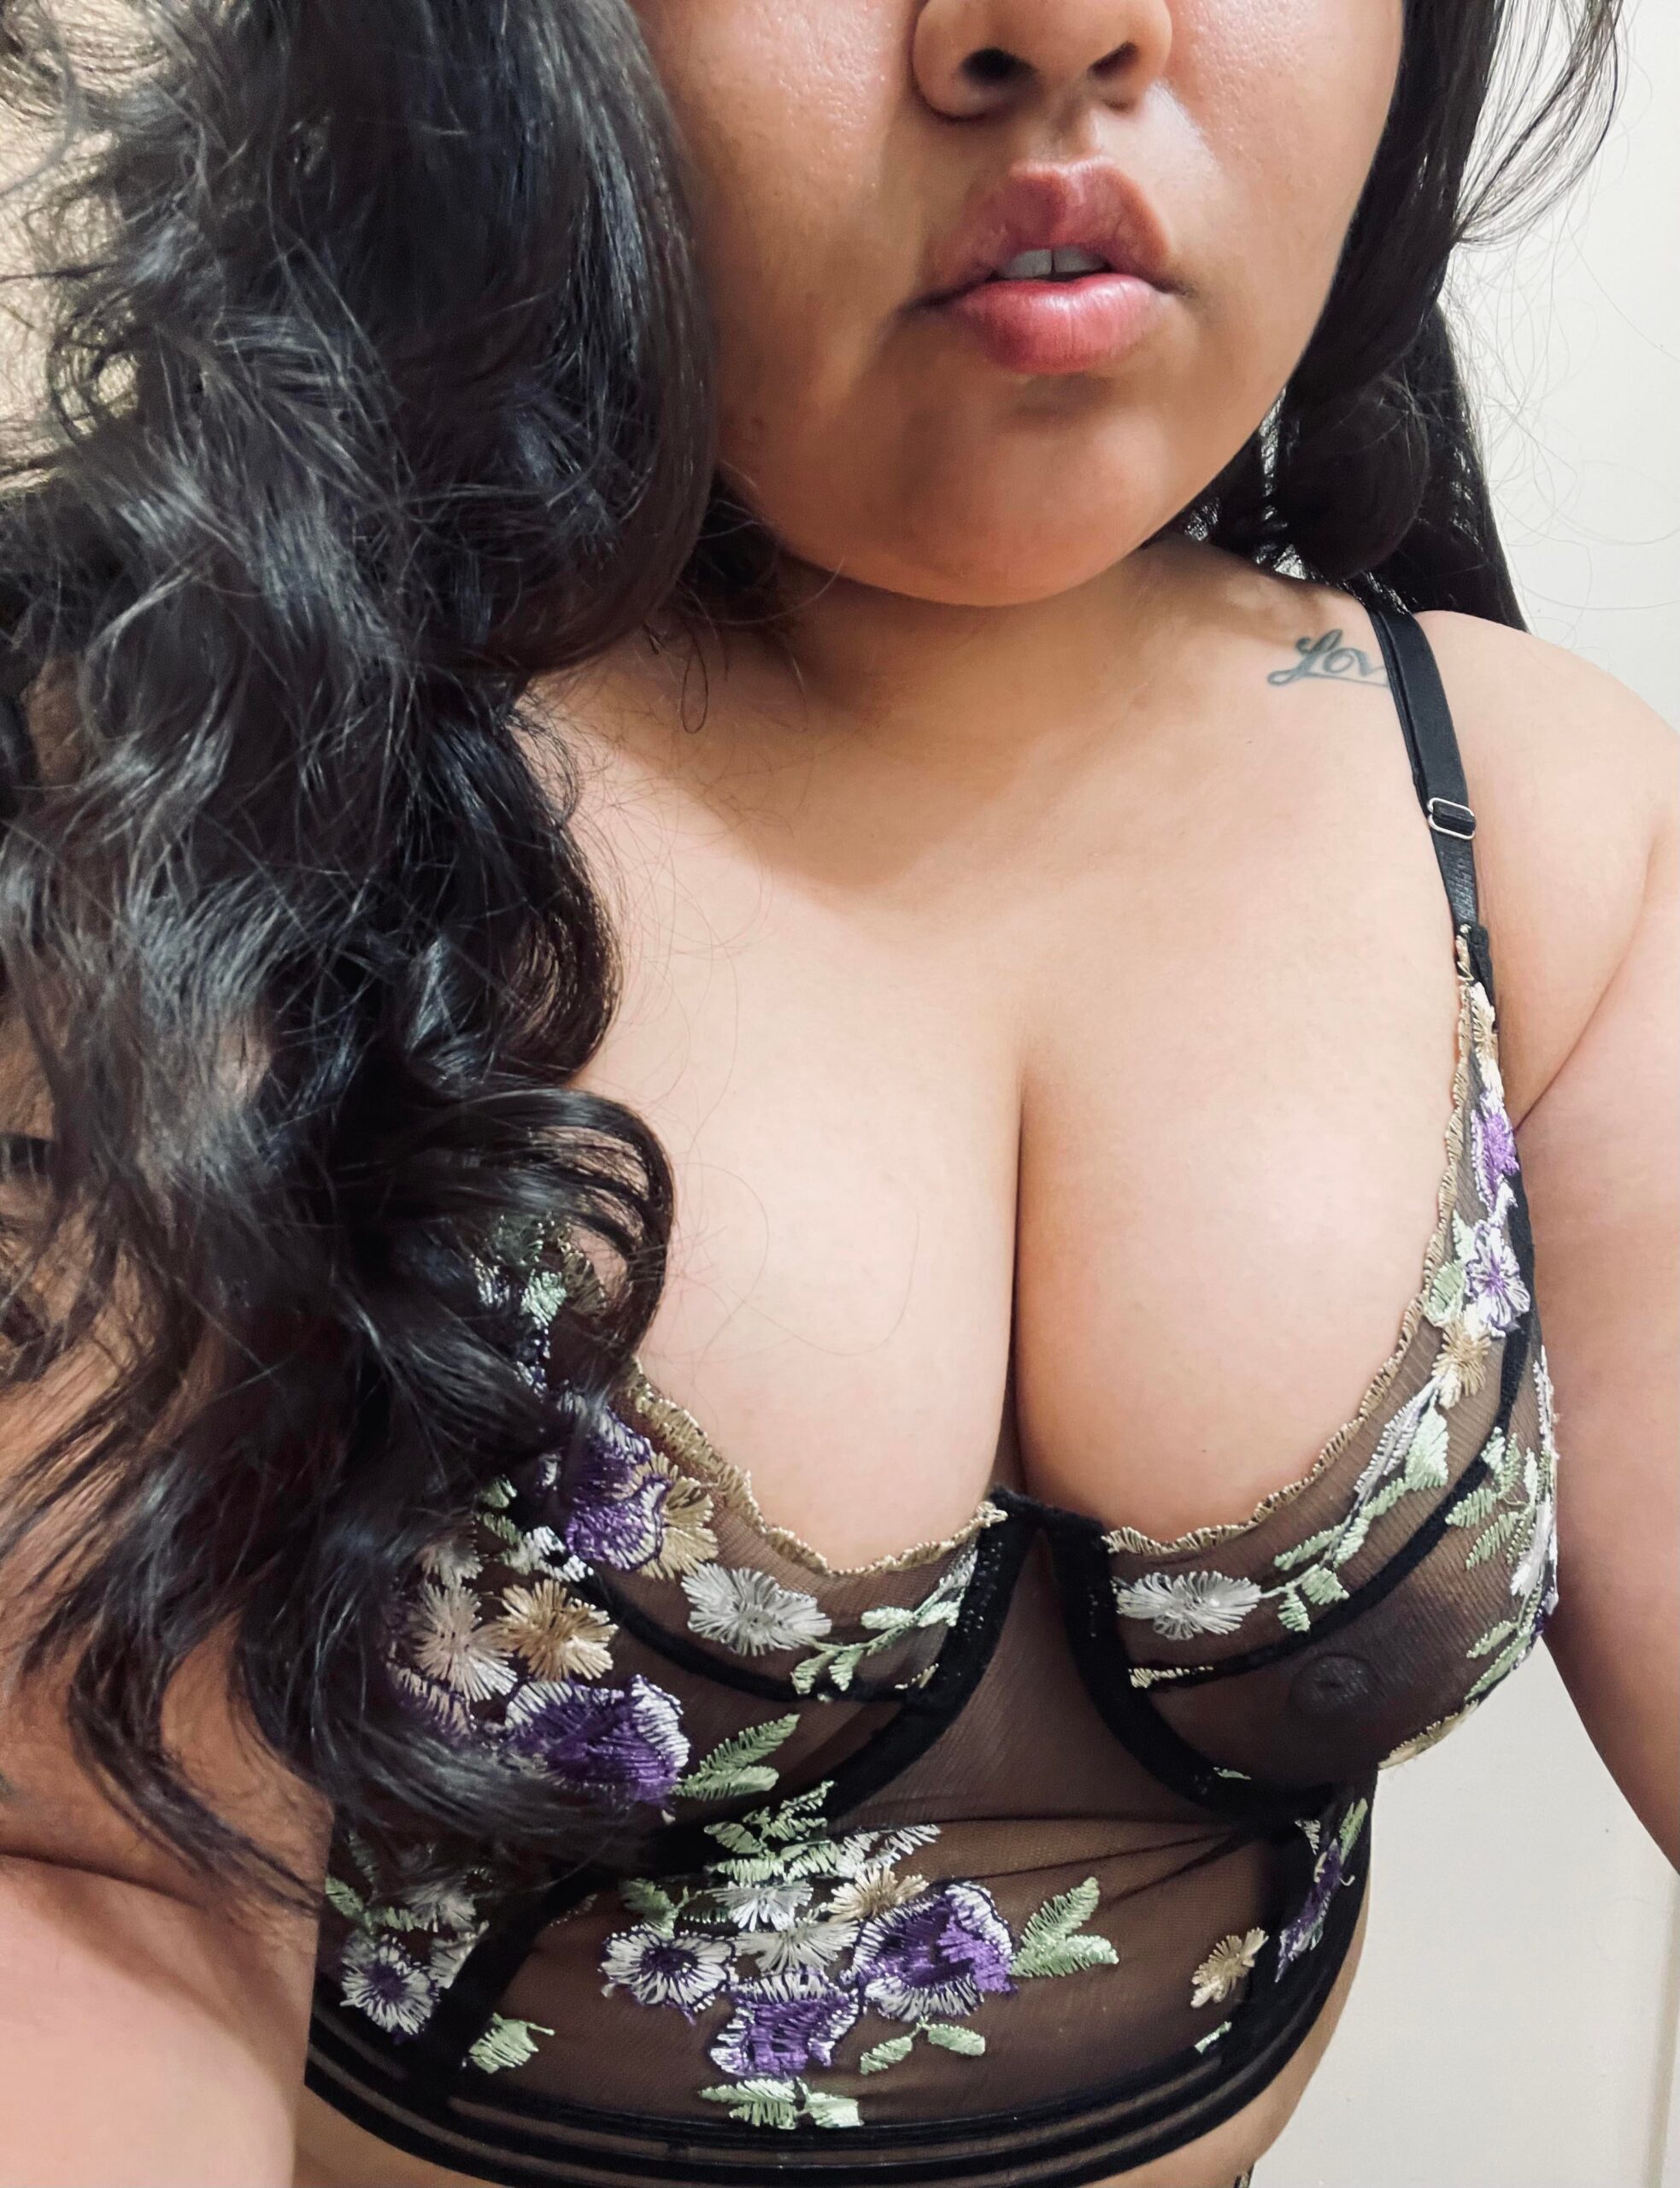 Bbwpictures -  Loving the purple on me